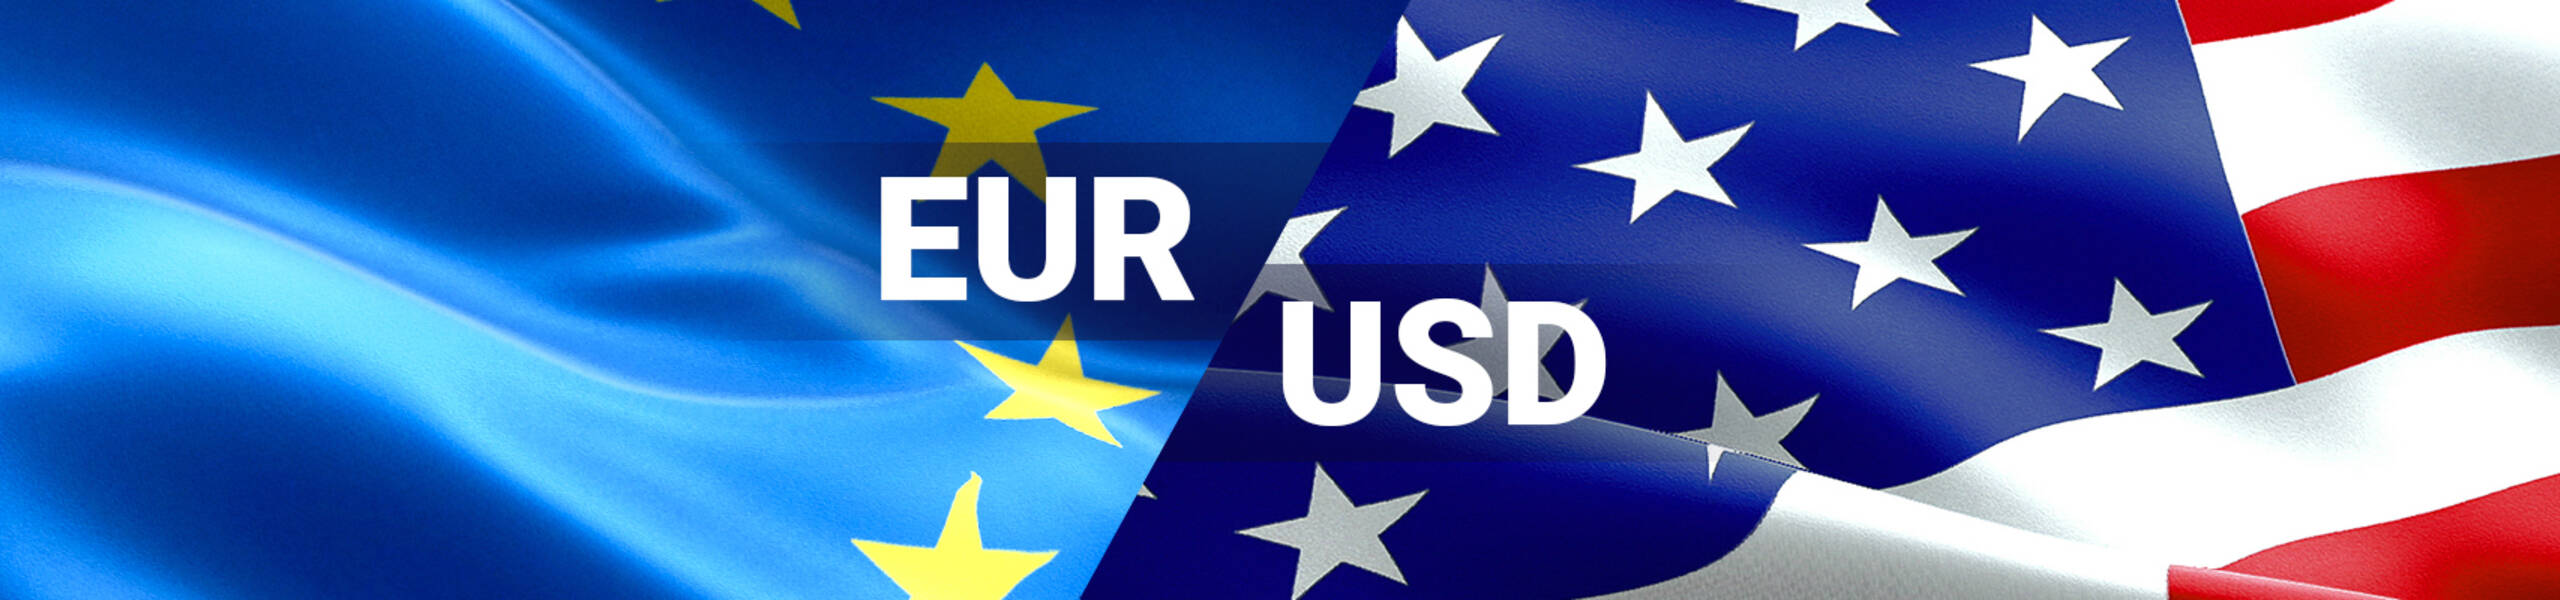 EUR/USD: ready to continue uptrend